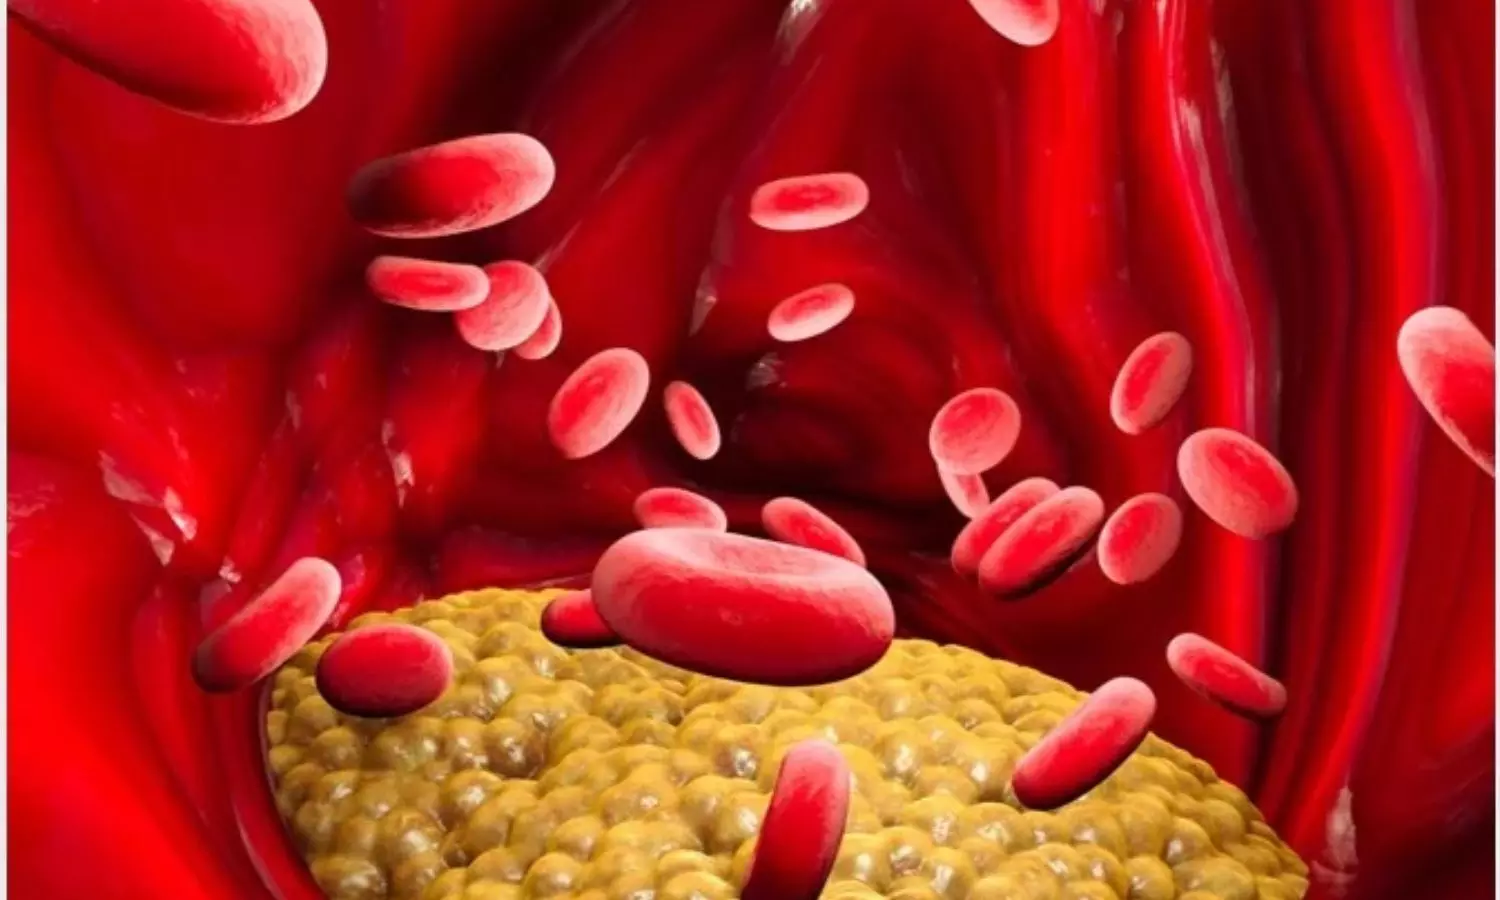 Earlier onset of hypertriglyceridemia increases   risk of CVD and mortality: JAHA